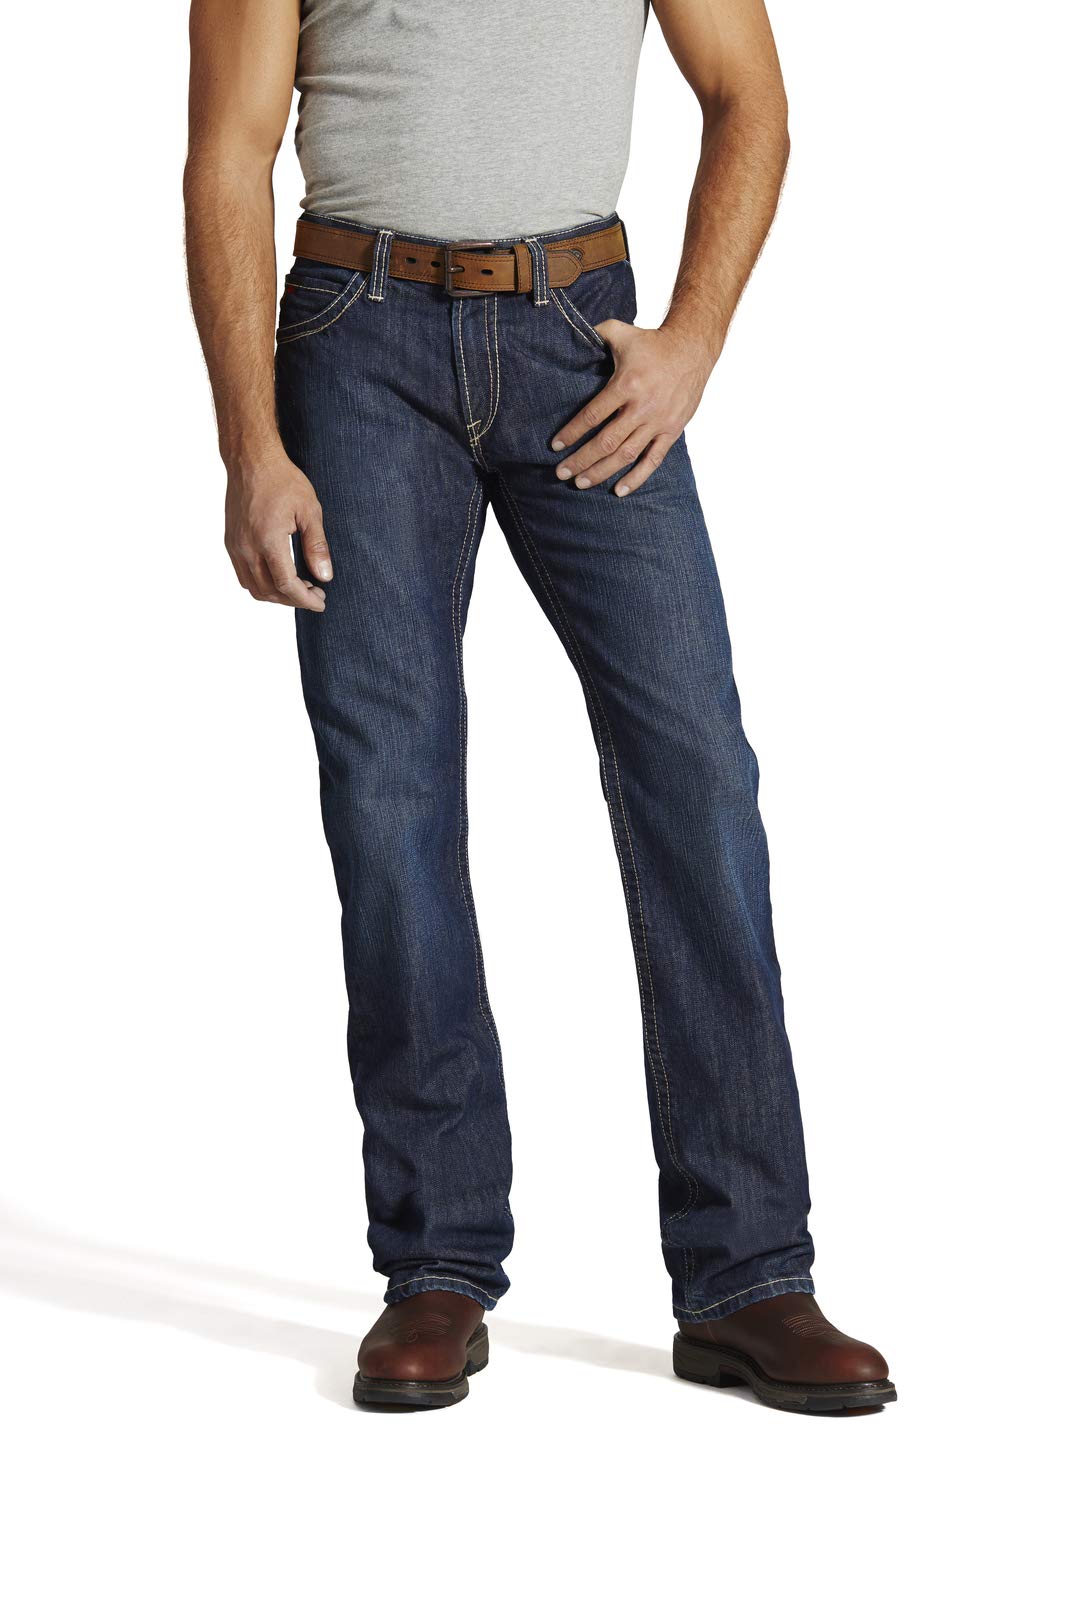 Ariat Male FR M4 Relaxed Boundary Boot Cut Jean Shale 36W x 38L